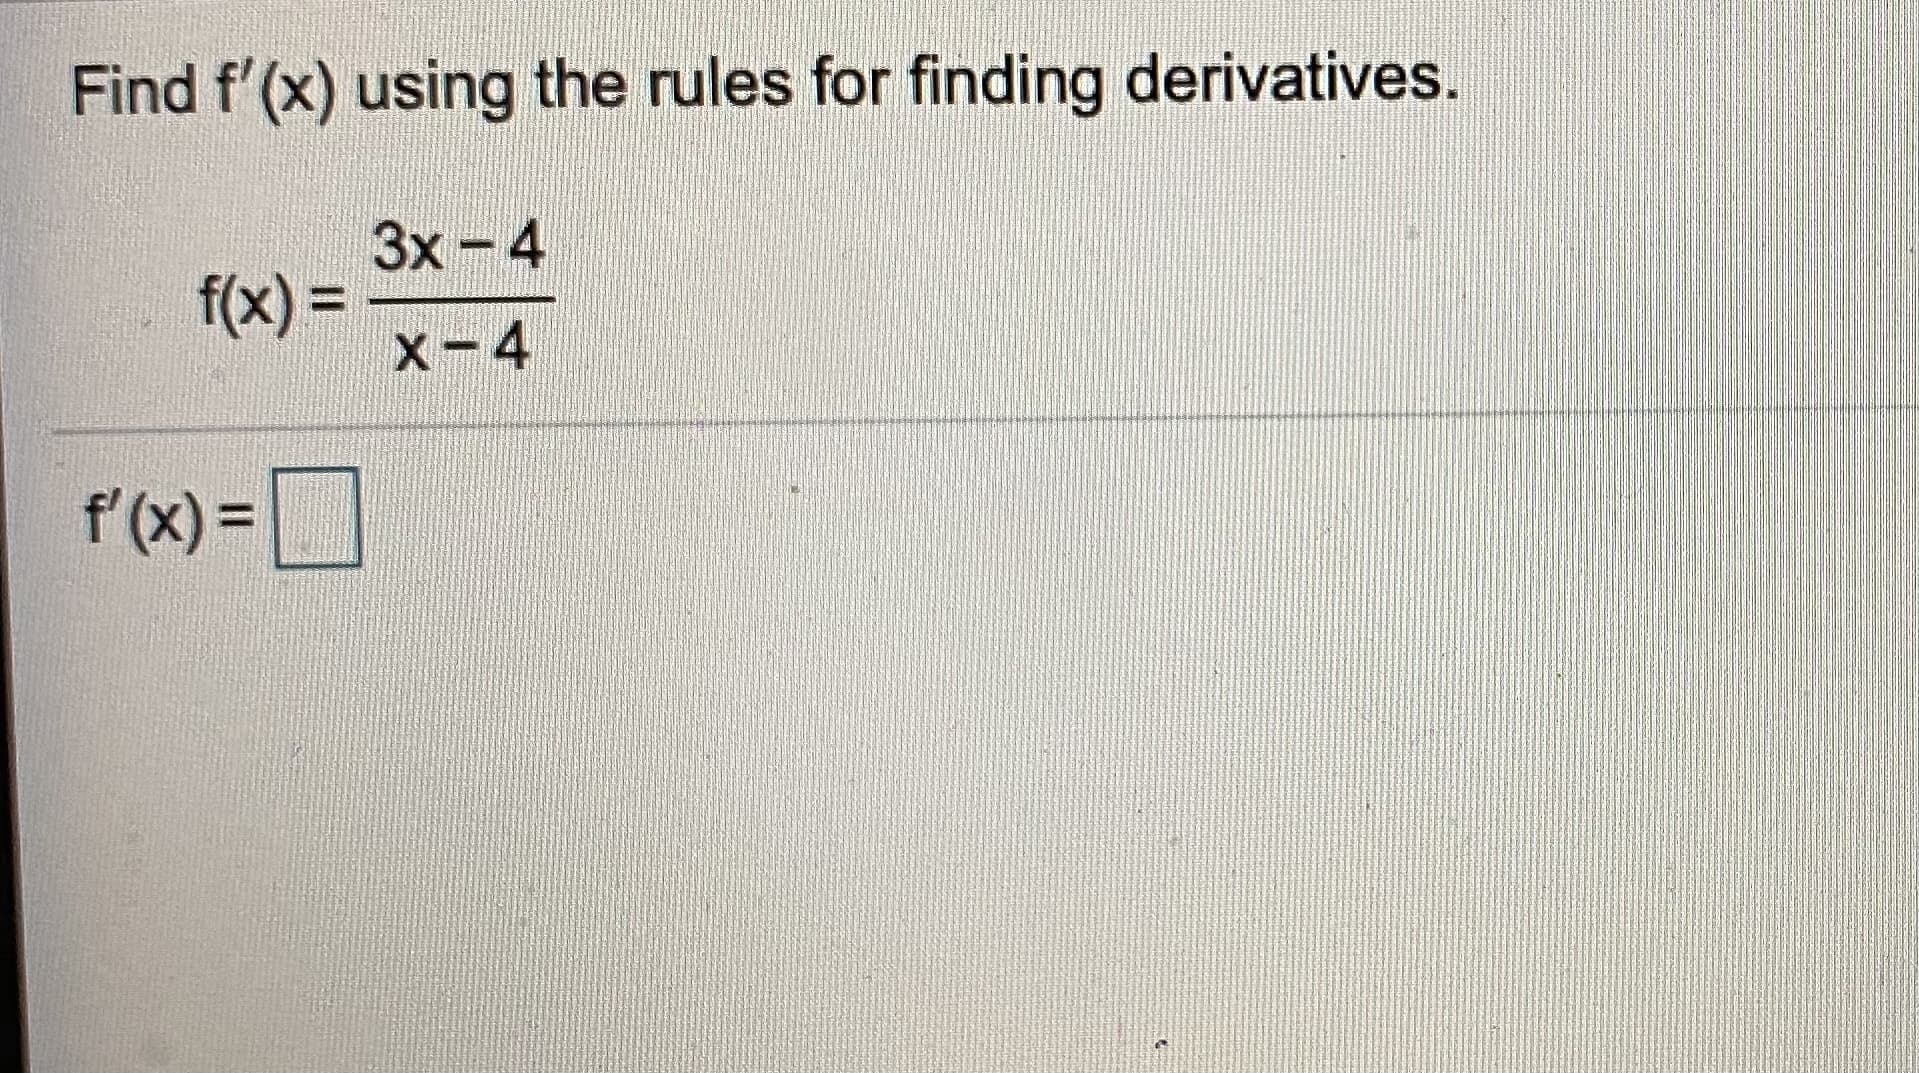 Find f'(x) using the rules for finding derivatives.
3x-4
f(x) =
x-4
f'(x) =
